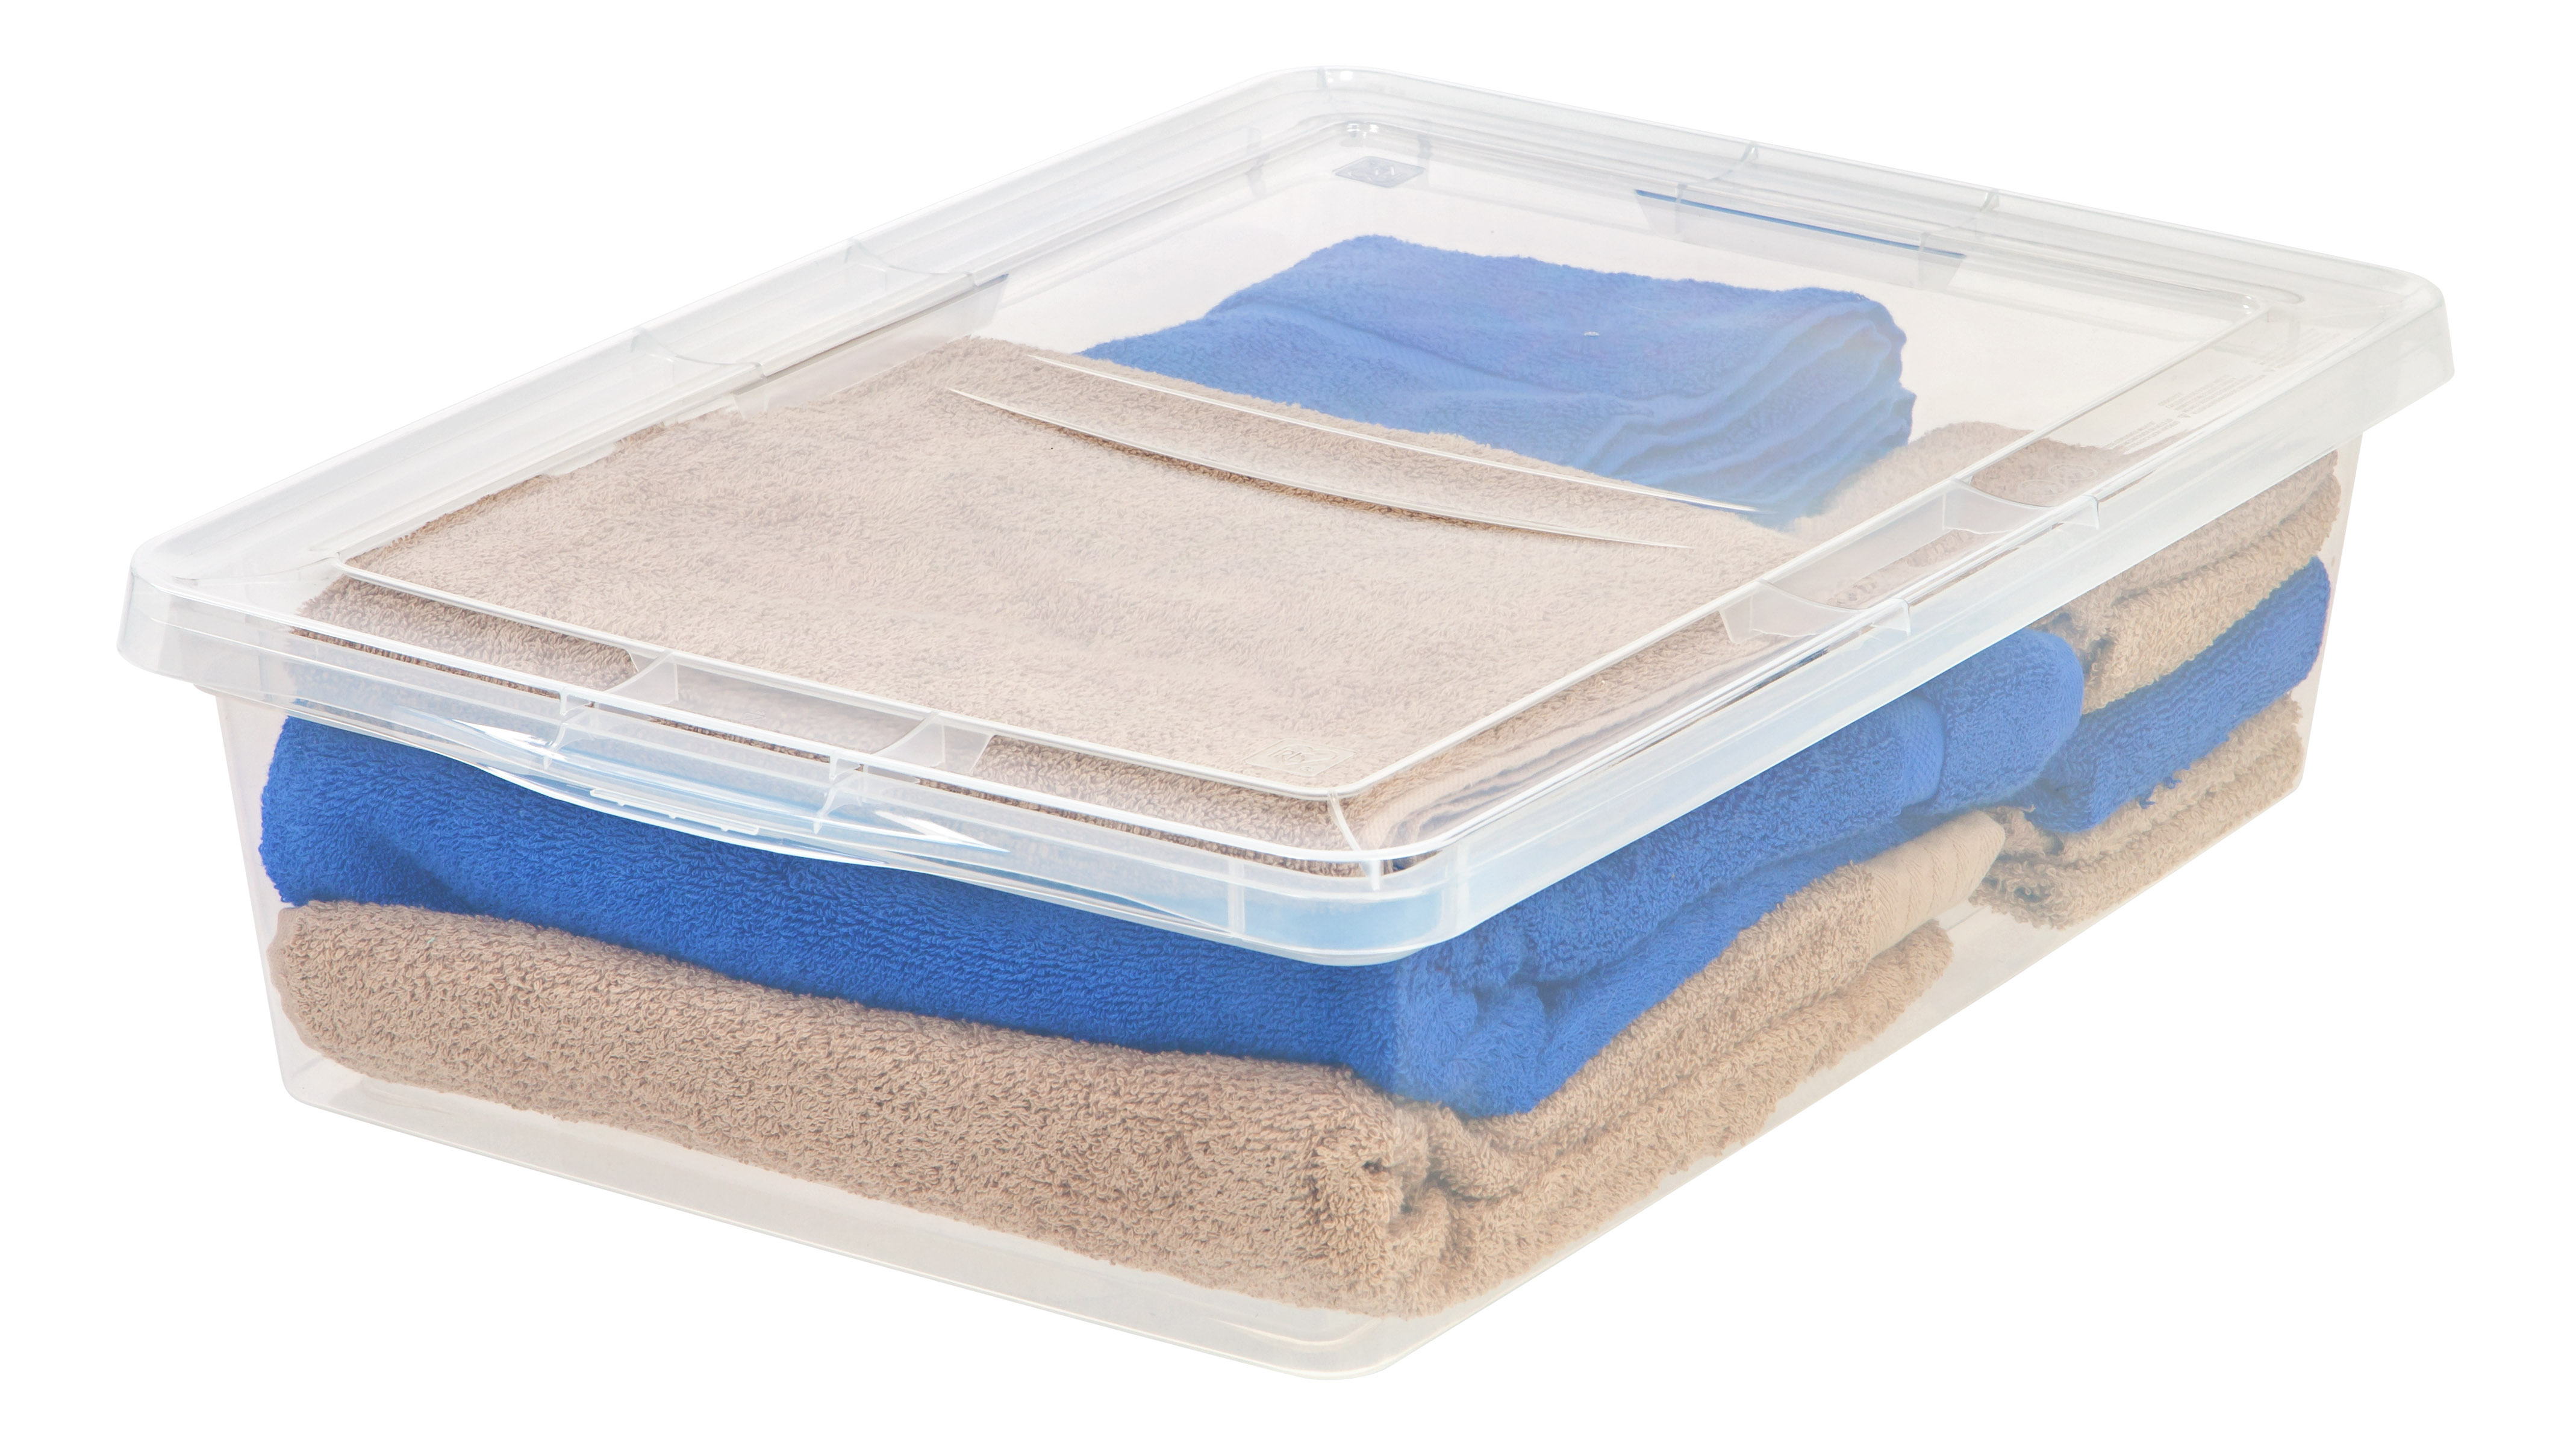 Mainstays 28 Qt. (7 gal.) Under Bed Plastic Storage Box, Clear, Set of 4 - image 5 of 8